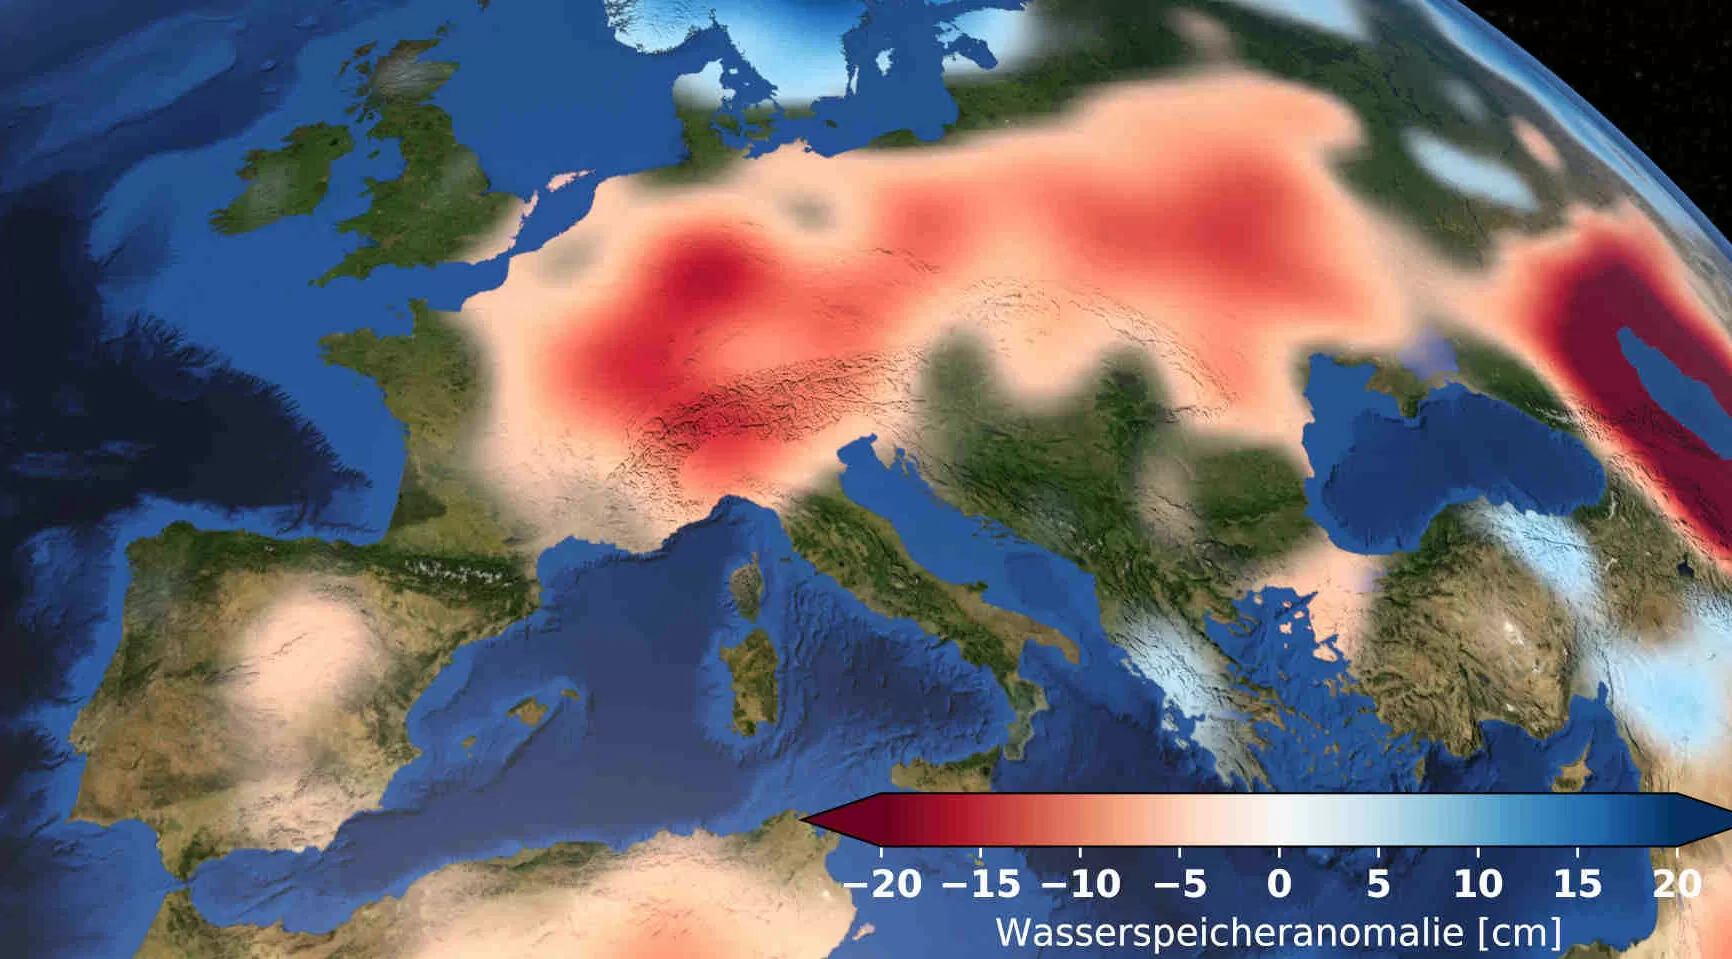 Scientists have warned of a catastrophic drought in Europe